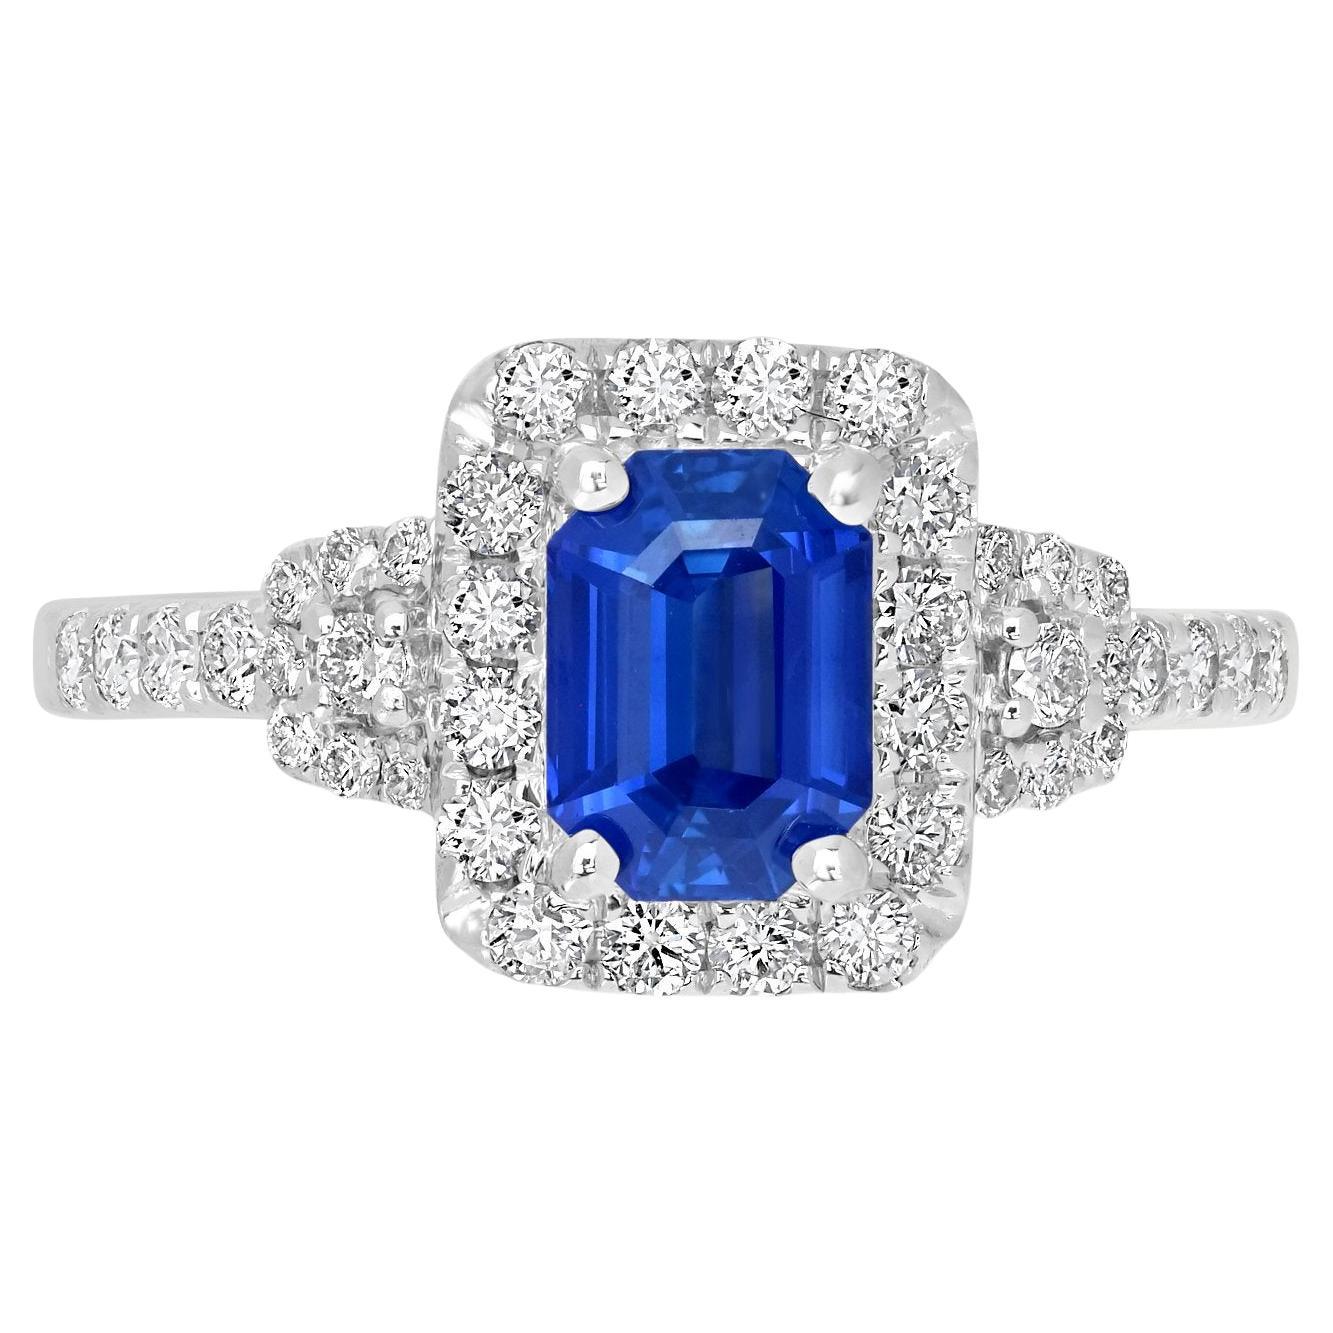 1.28ct Blue Sapphire Rings with 0.54Tct Diamond Set in 14K White Gold